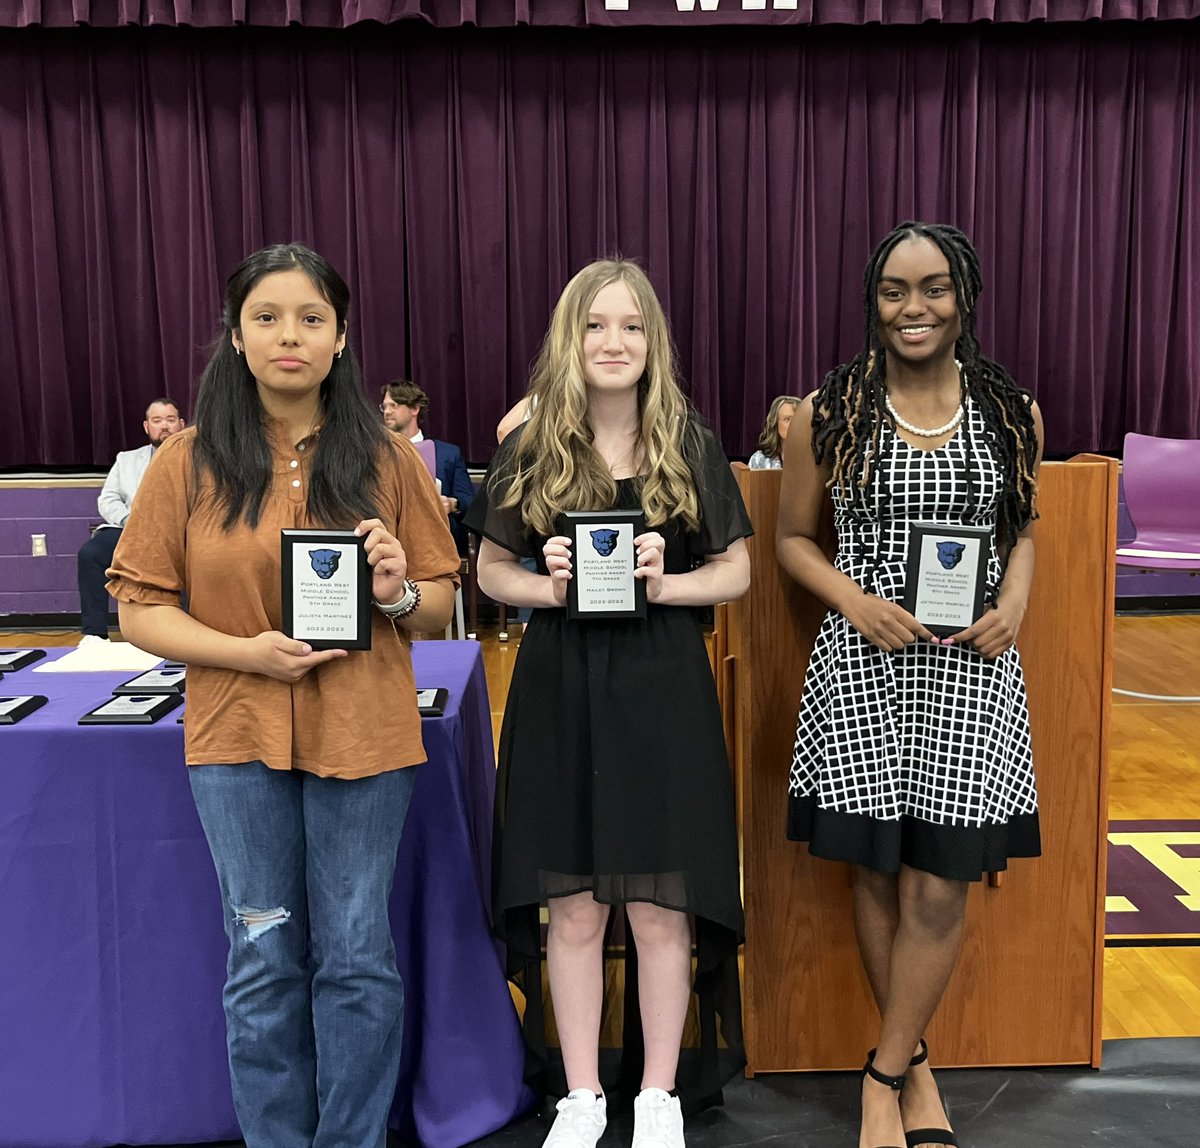 Portland West Middle School Awards Day
Panther Award winners